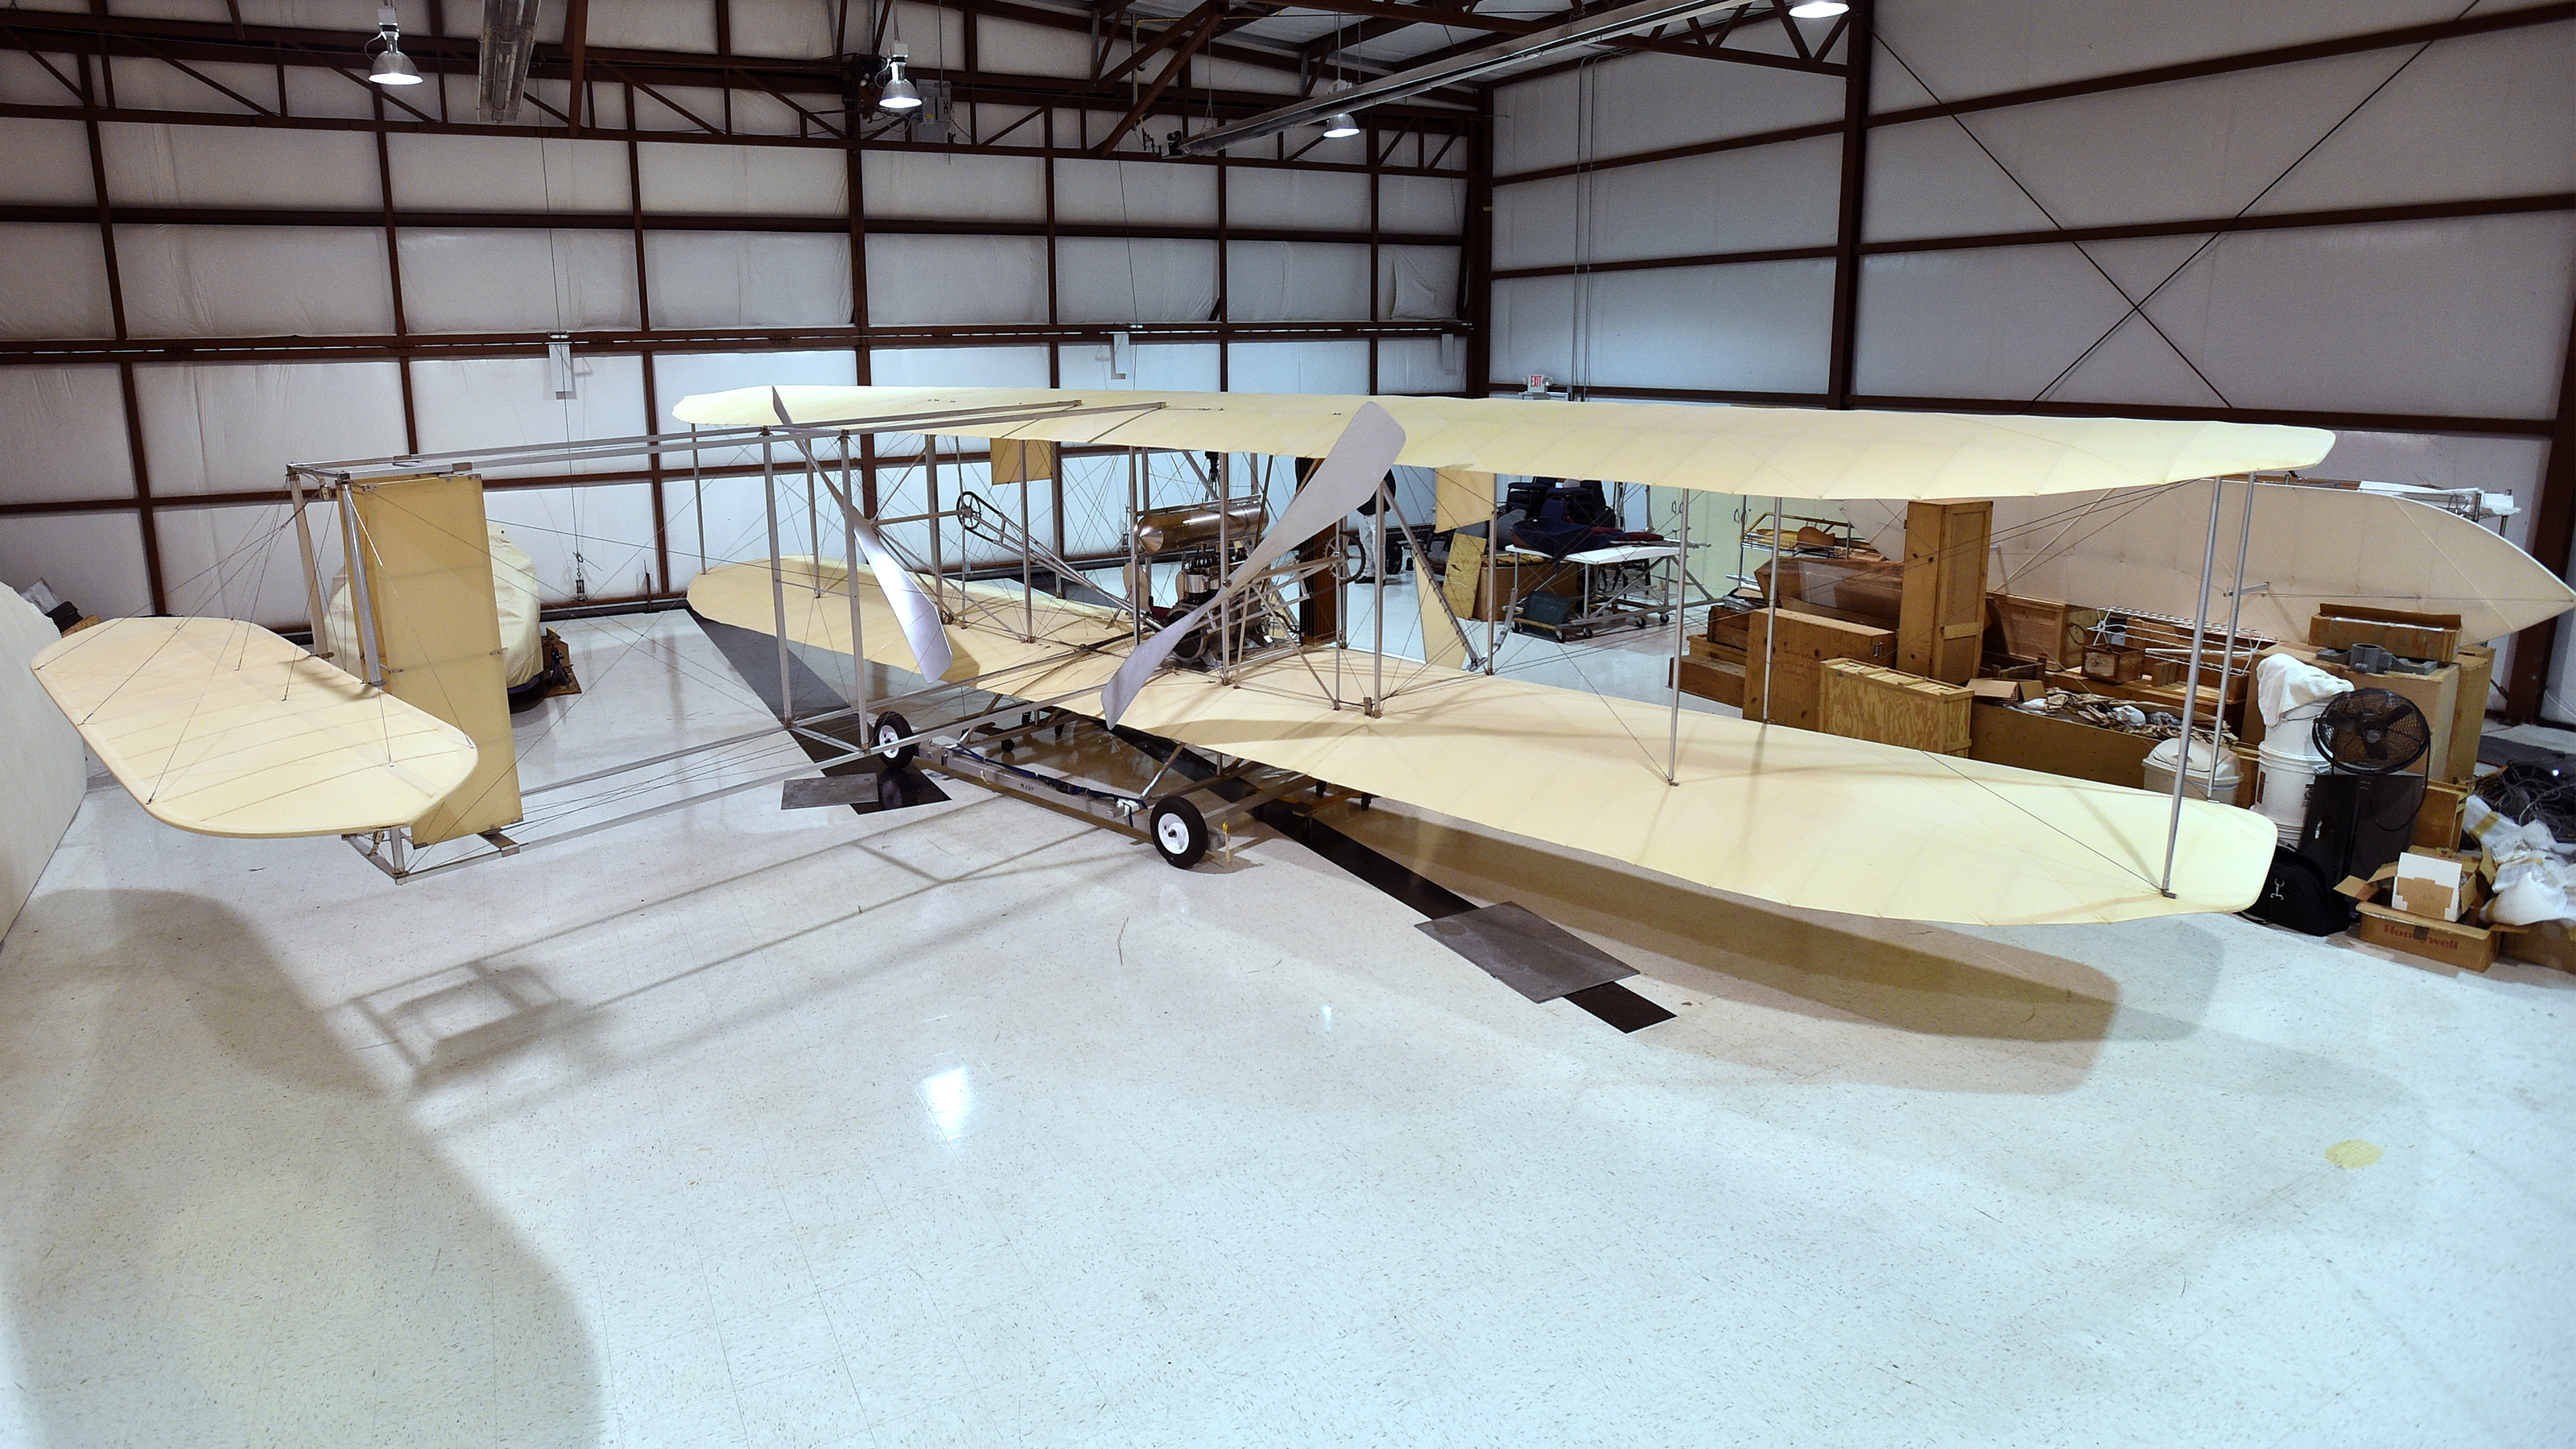 The Wright Experience Museum's Ken Hyde, a retired American Airlines pilot, uses science, technology, engineering, and math concepts to re-create a multitude of the Wright brothers' aircraft designs in Warrenton, Virginia. Photo by David Tulis.